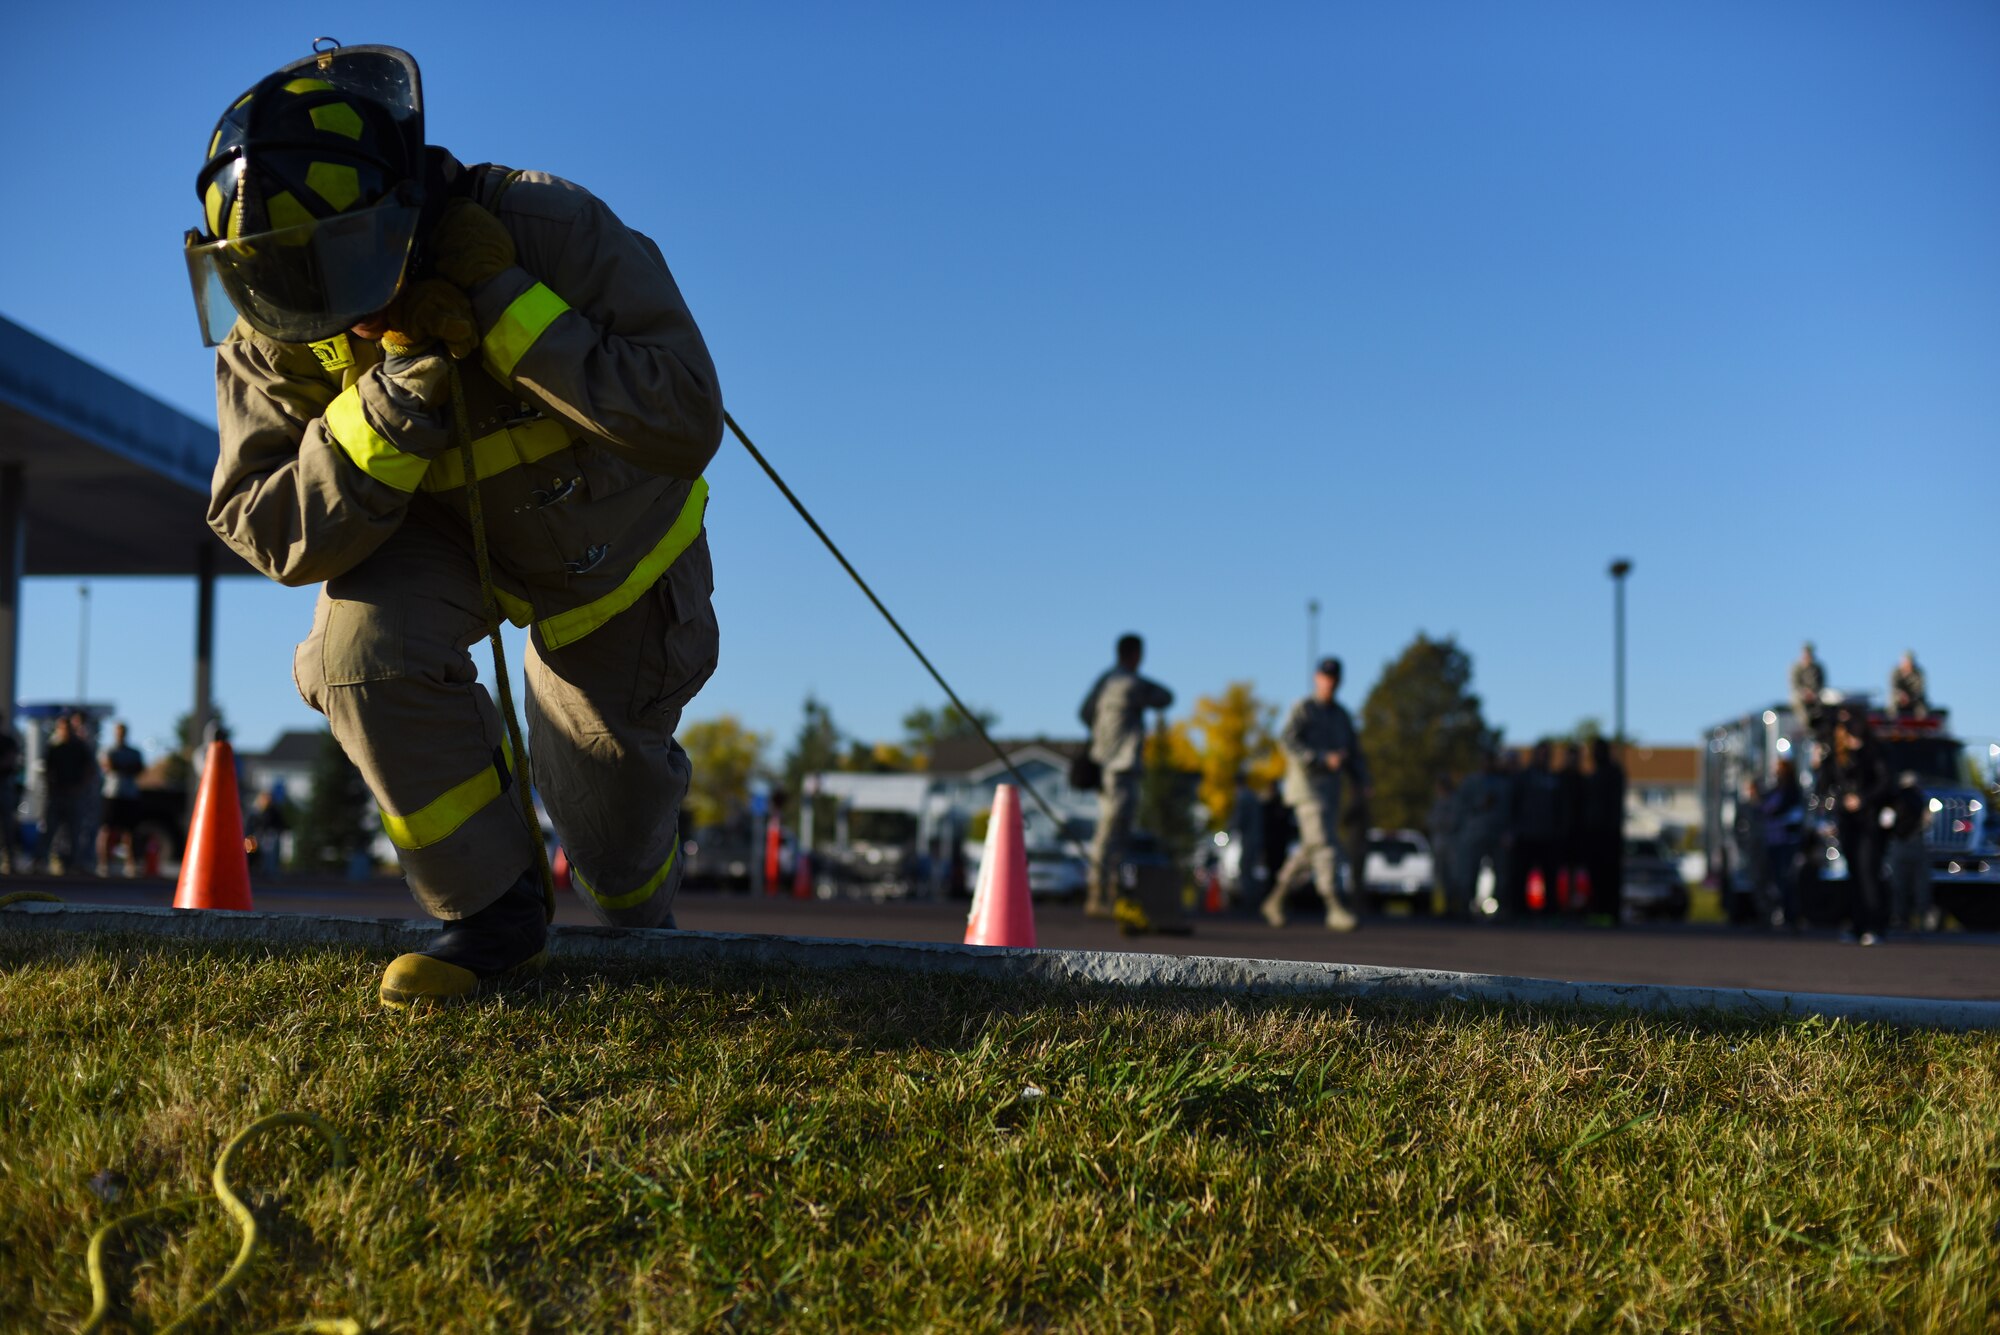 An Airman with the 341st Civil Engineer Squadron pulls a weighted sled during Malmstrom Air Force Base’s fourth annual Fire Prevention Week fire muster Oct. 10. The challenge consisted of about 10 different stations where competitors had to work as a team and muster all their strength to finish with the best time. (U.S. Air Force photo/Airman 1st Class Collin Schmidt) 